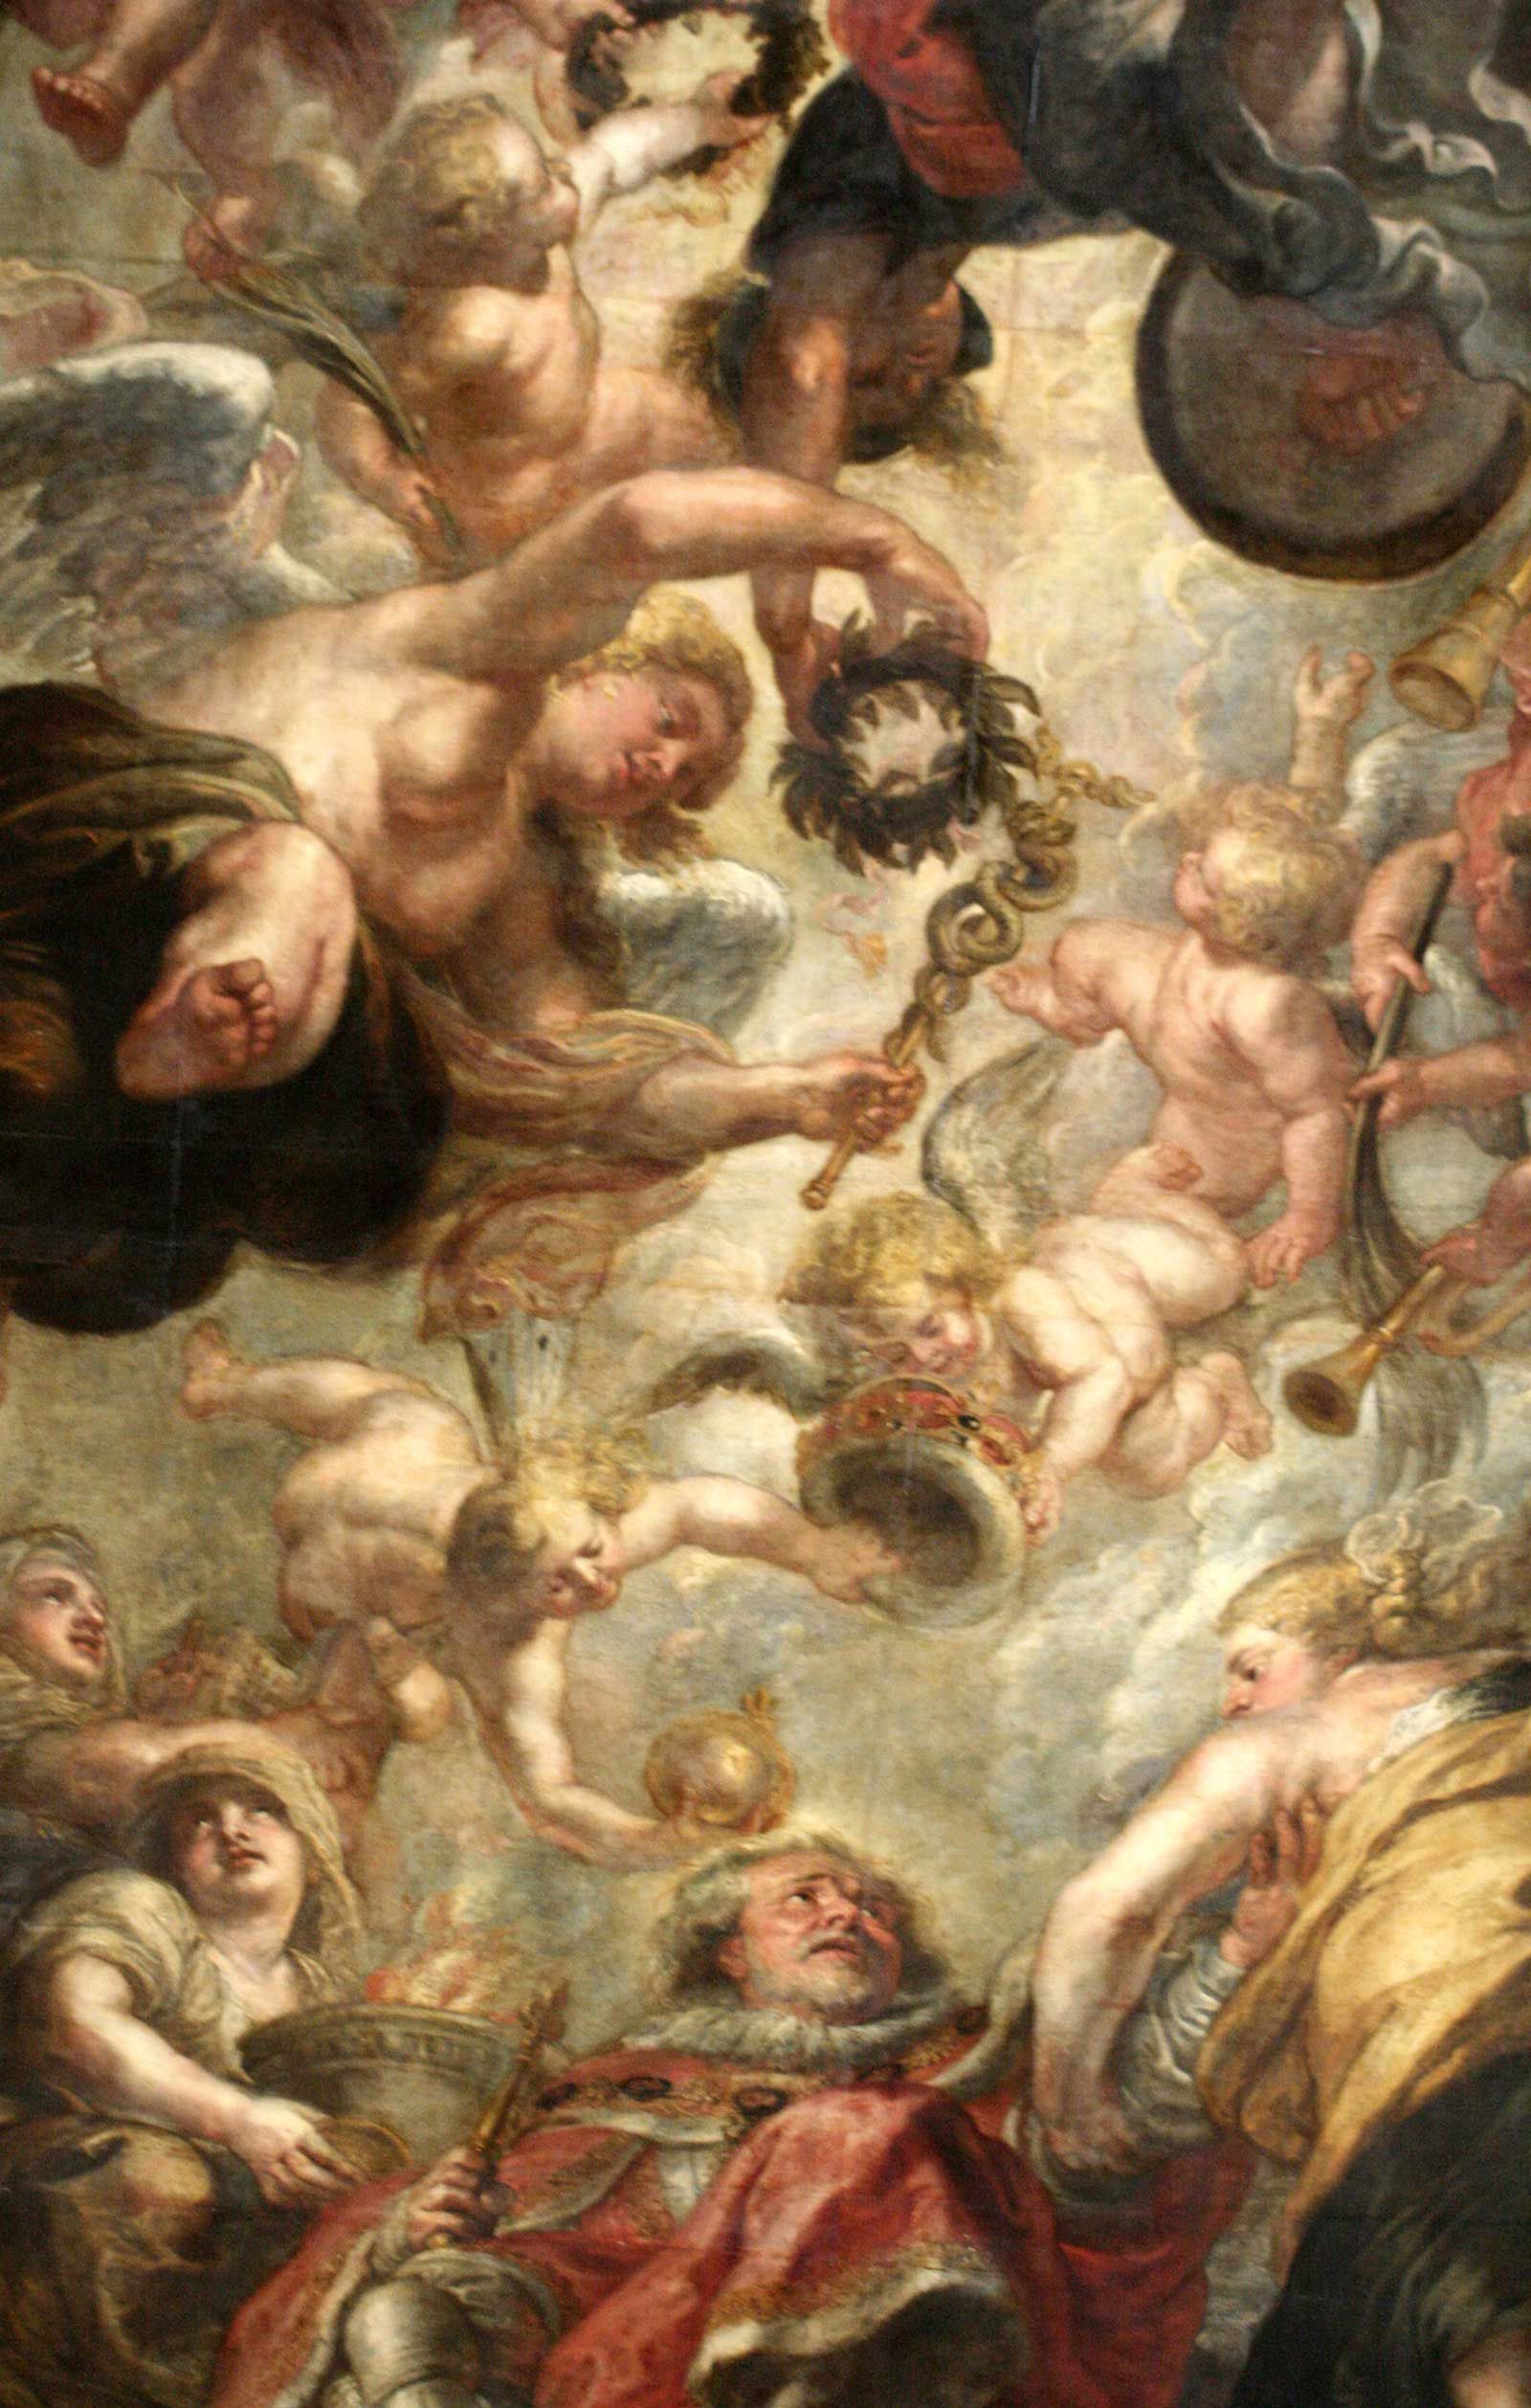 Ceiling painting with babies, robes, and royals at whitehall palace, by Rubens, 1633